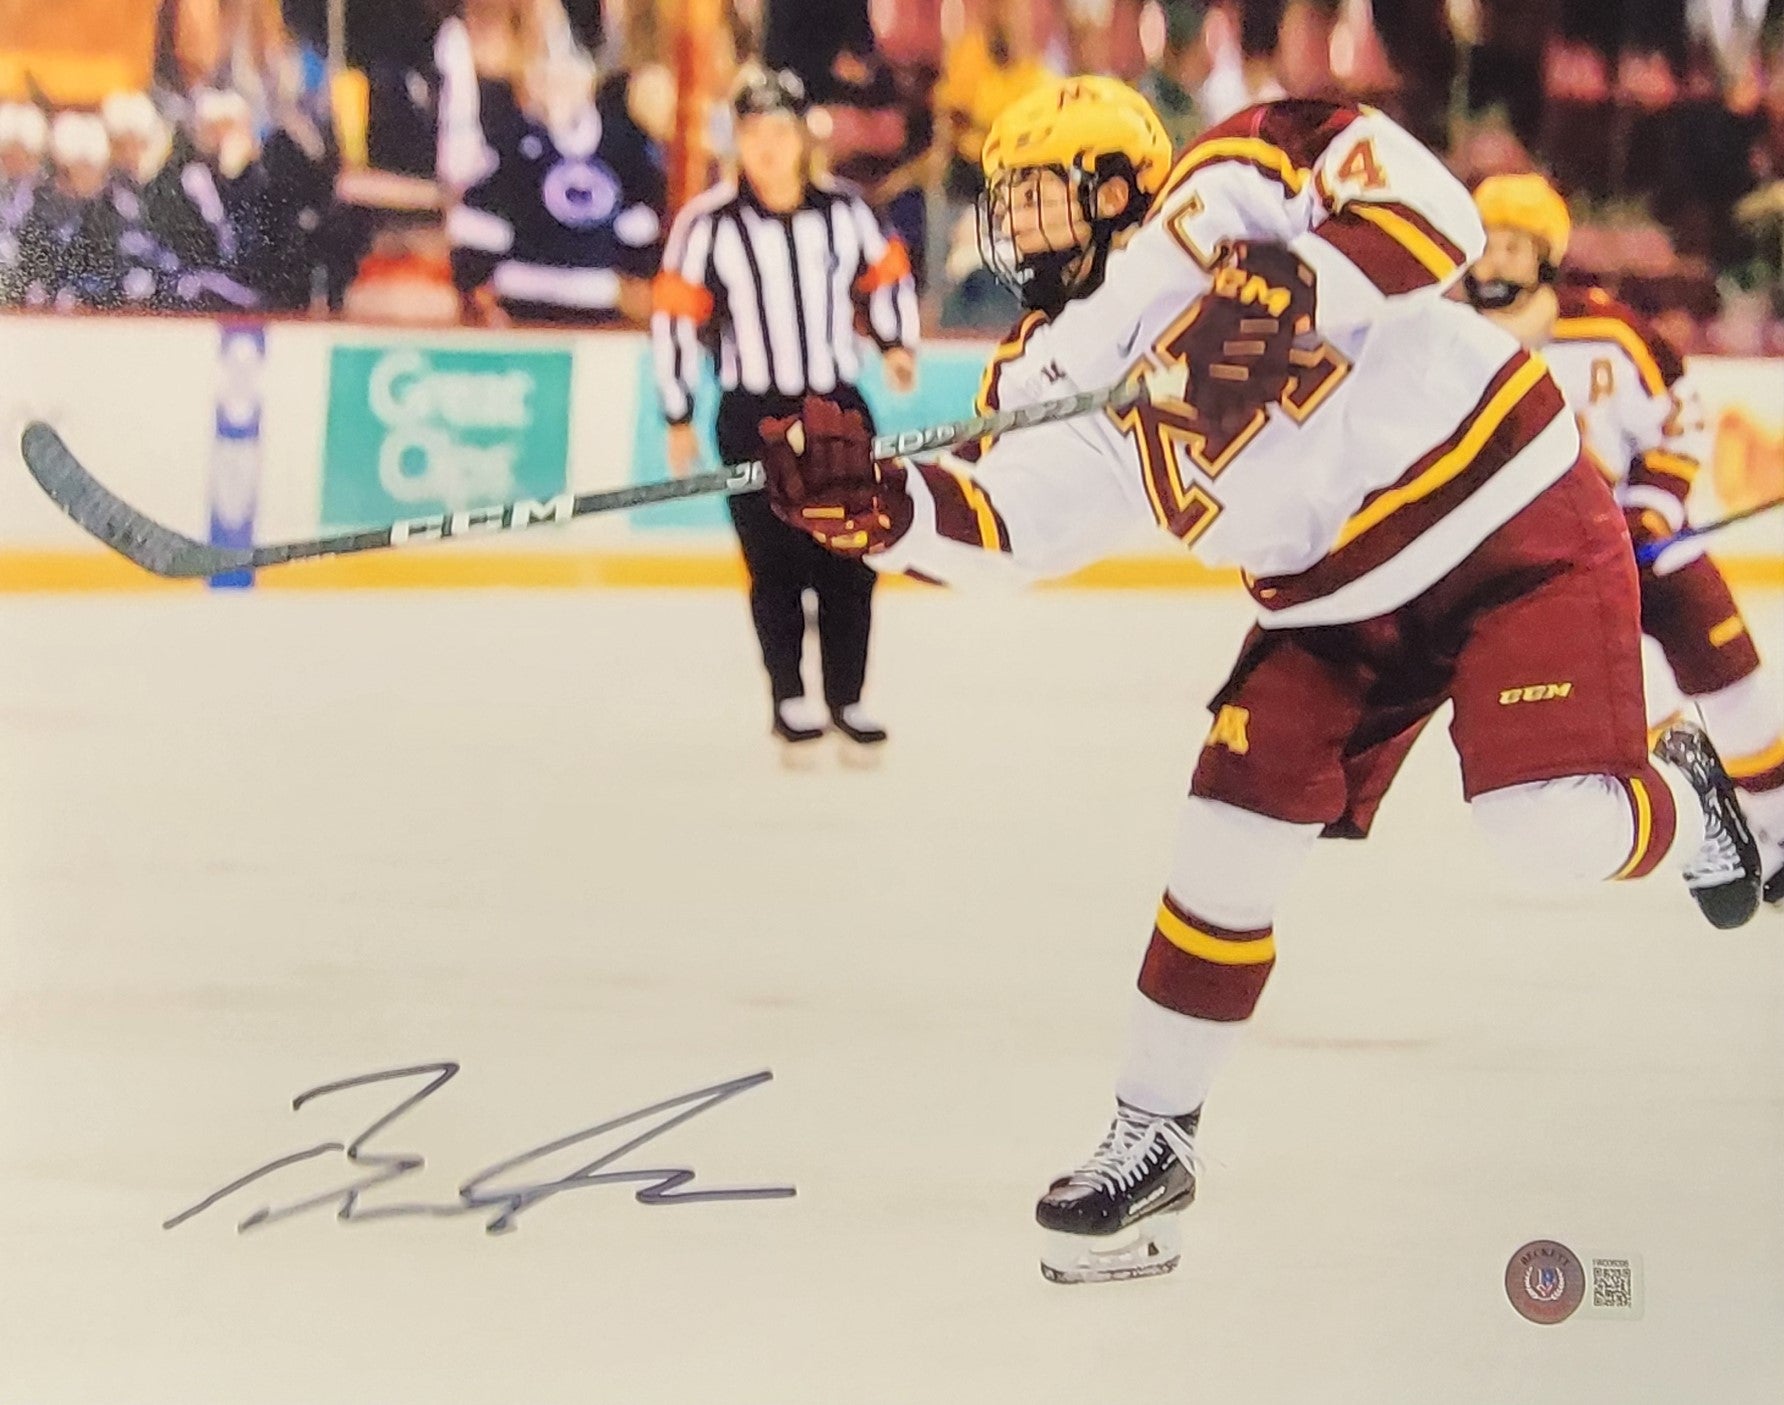 Brock Faber 'College' Signed 11x14 Photo #3